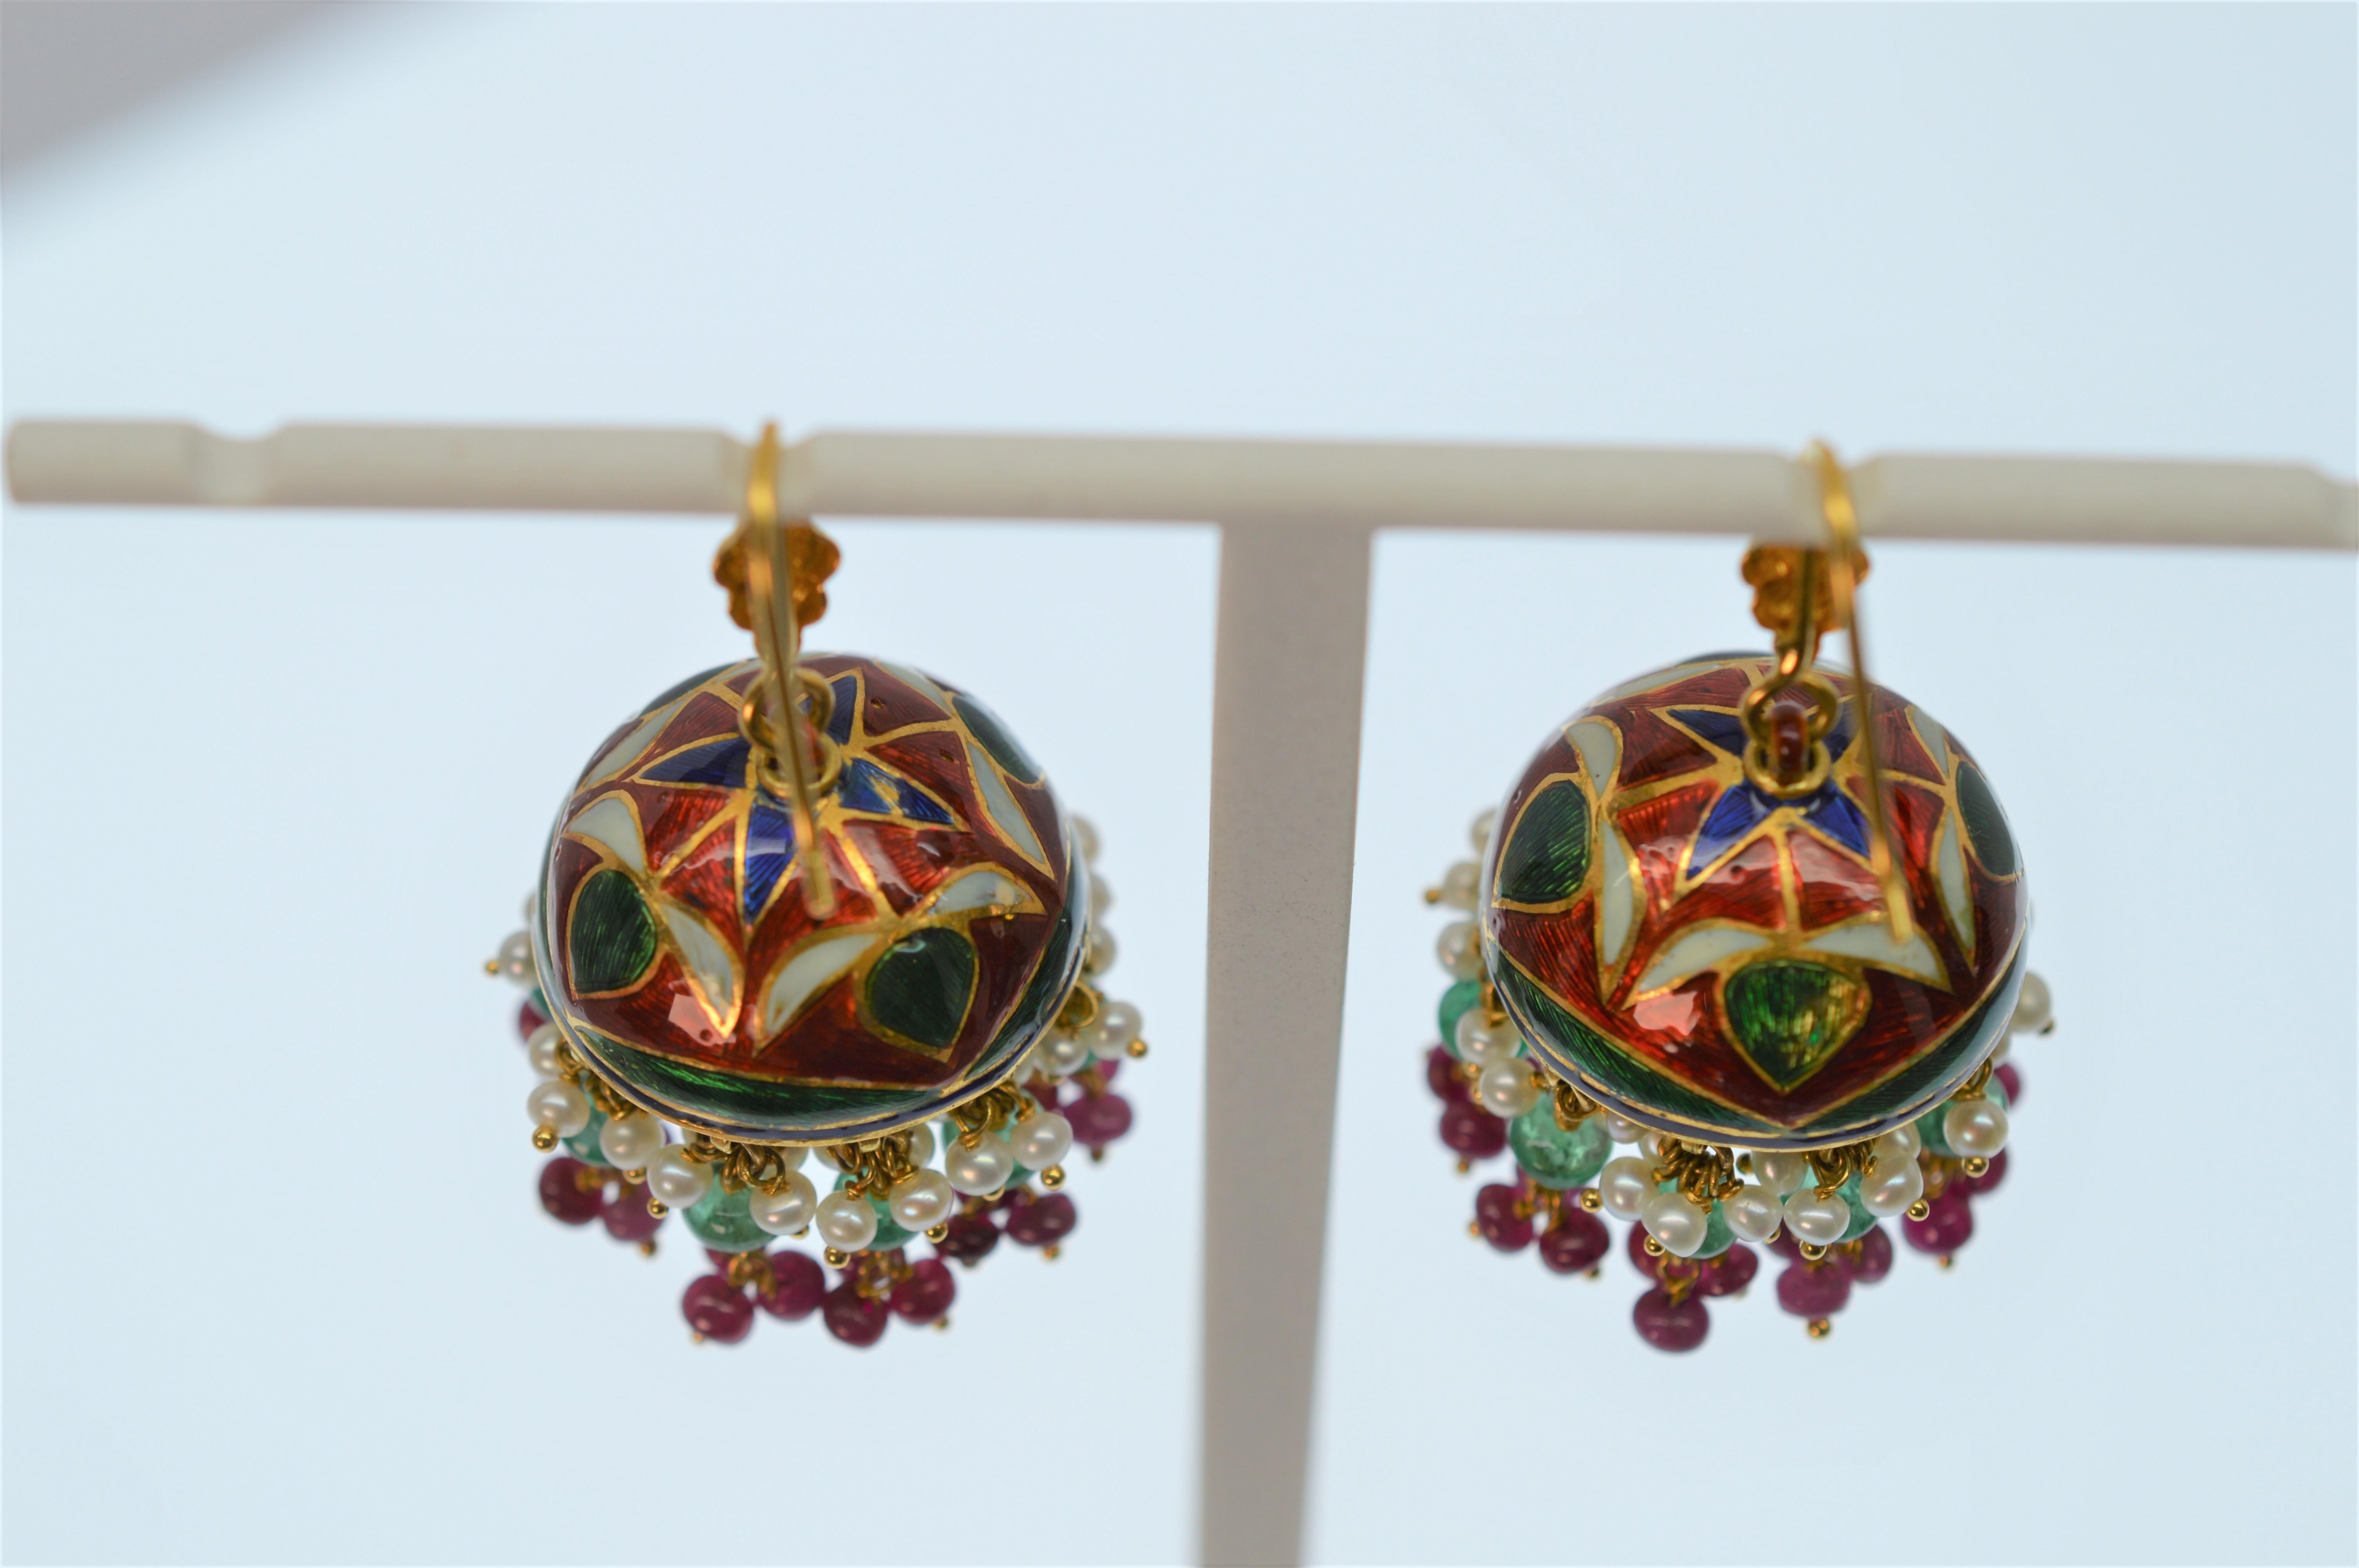 Unbelievable workmanship create the fine details in these earrings as 